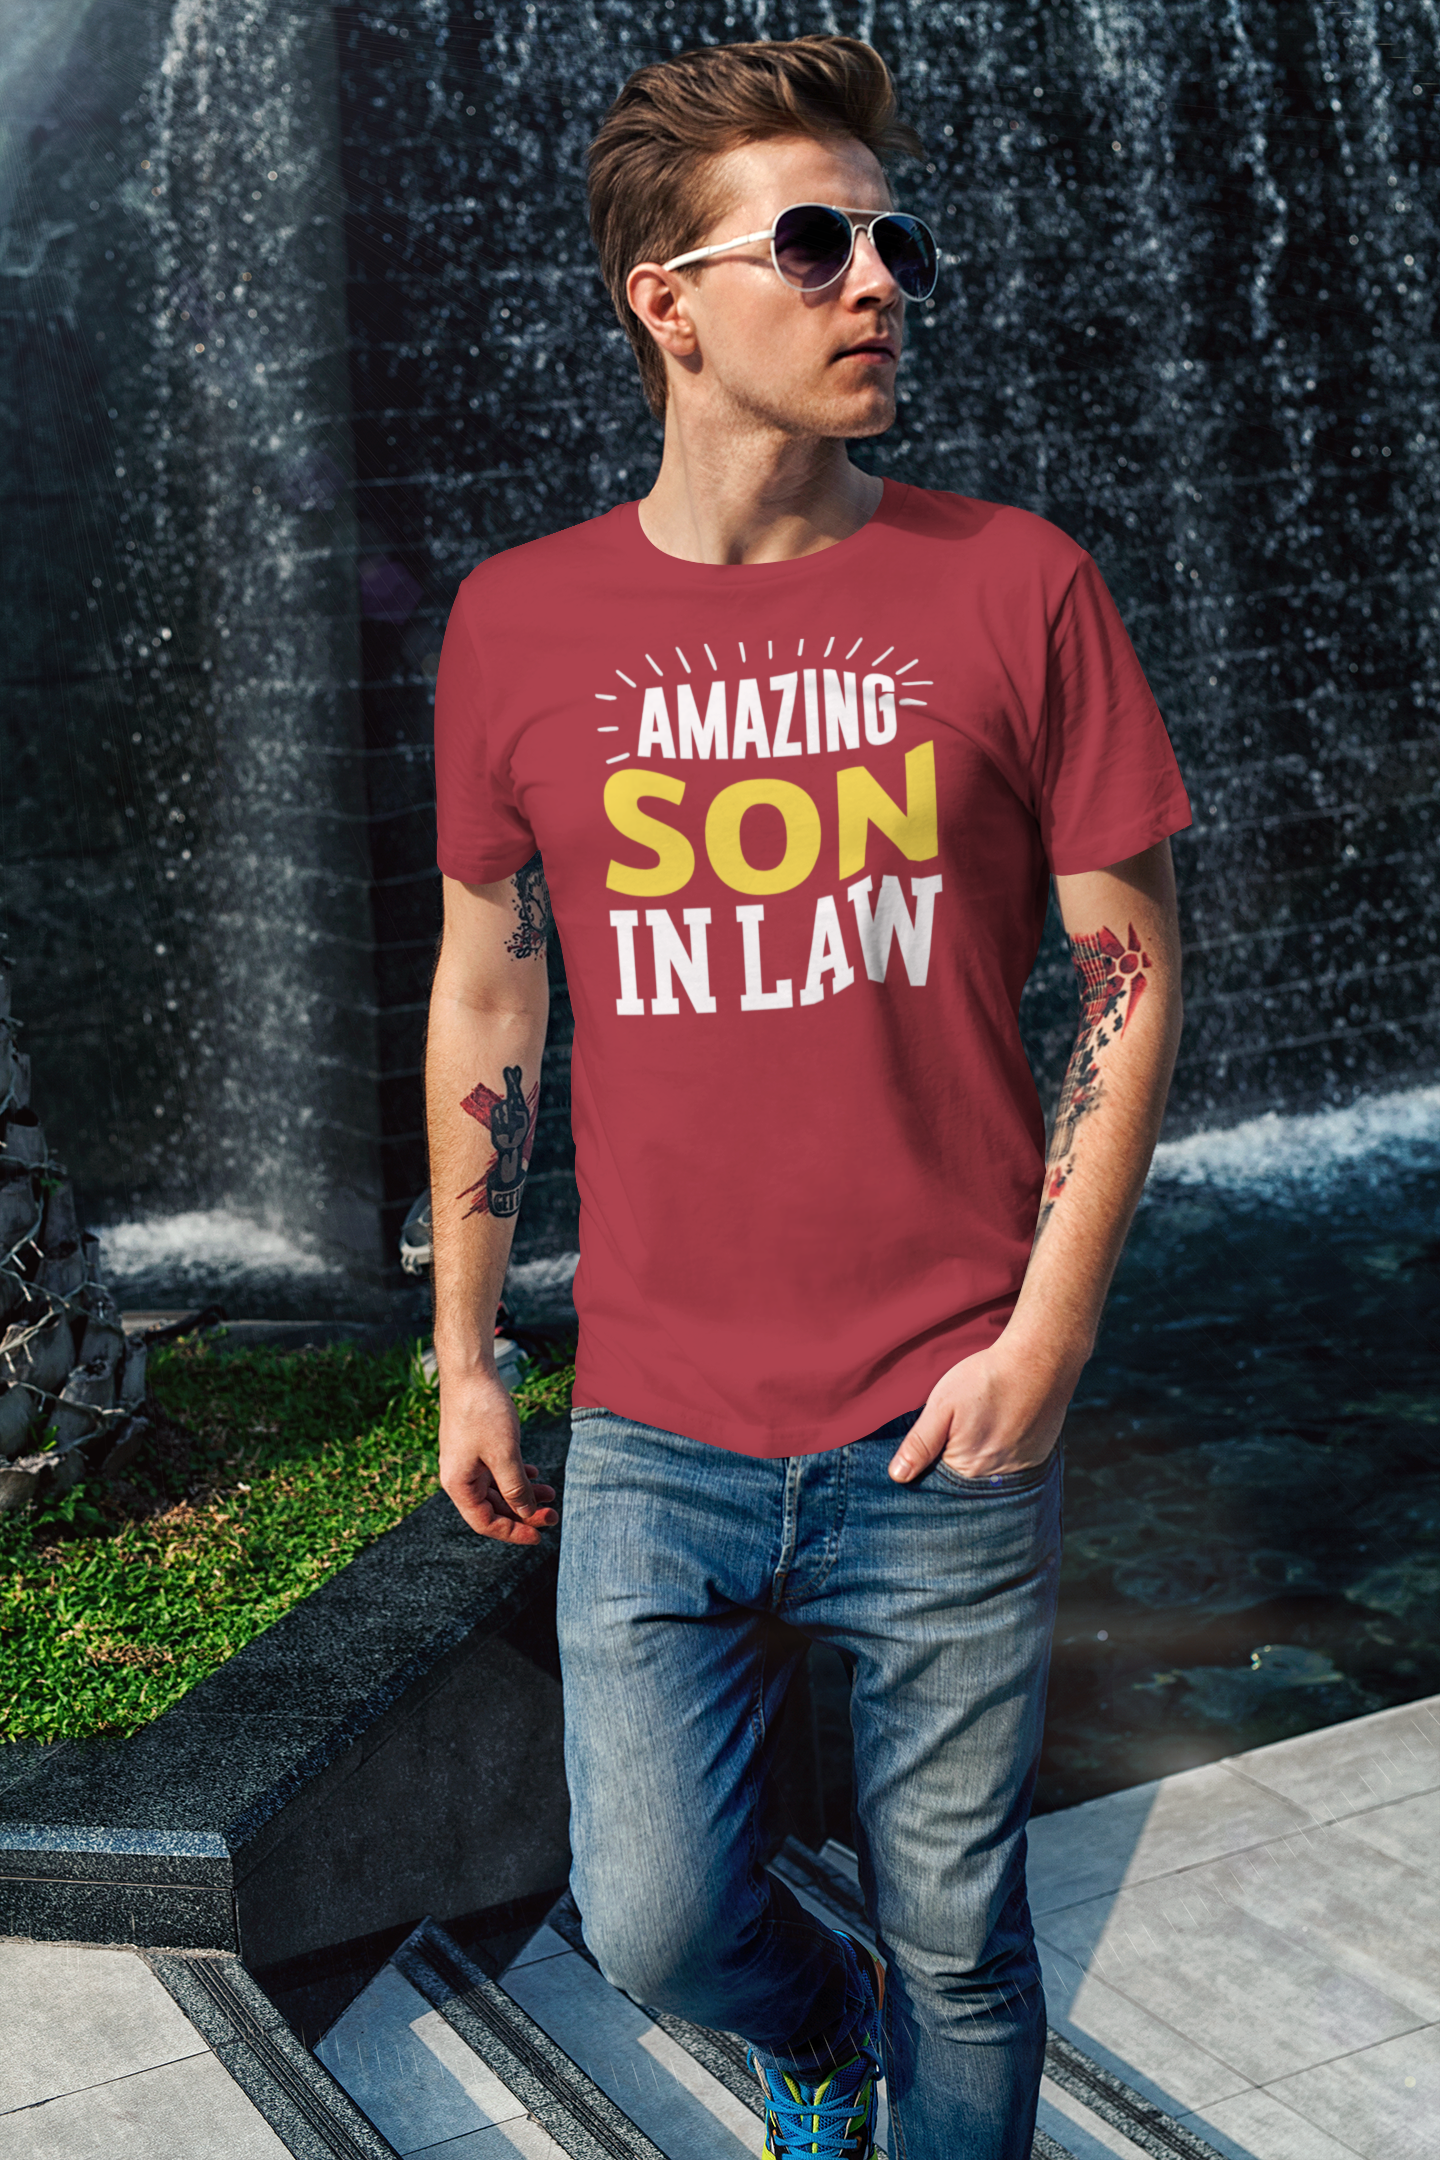 Amazing Son in Law, Family Shirts, Family Reunion Shirts, Trendy Shirts